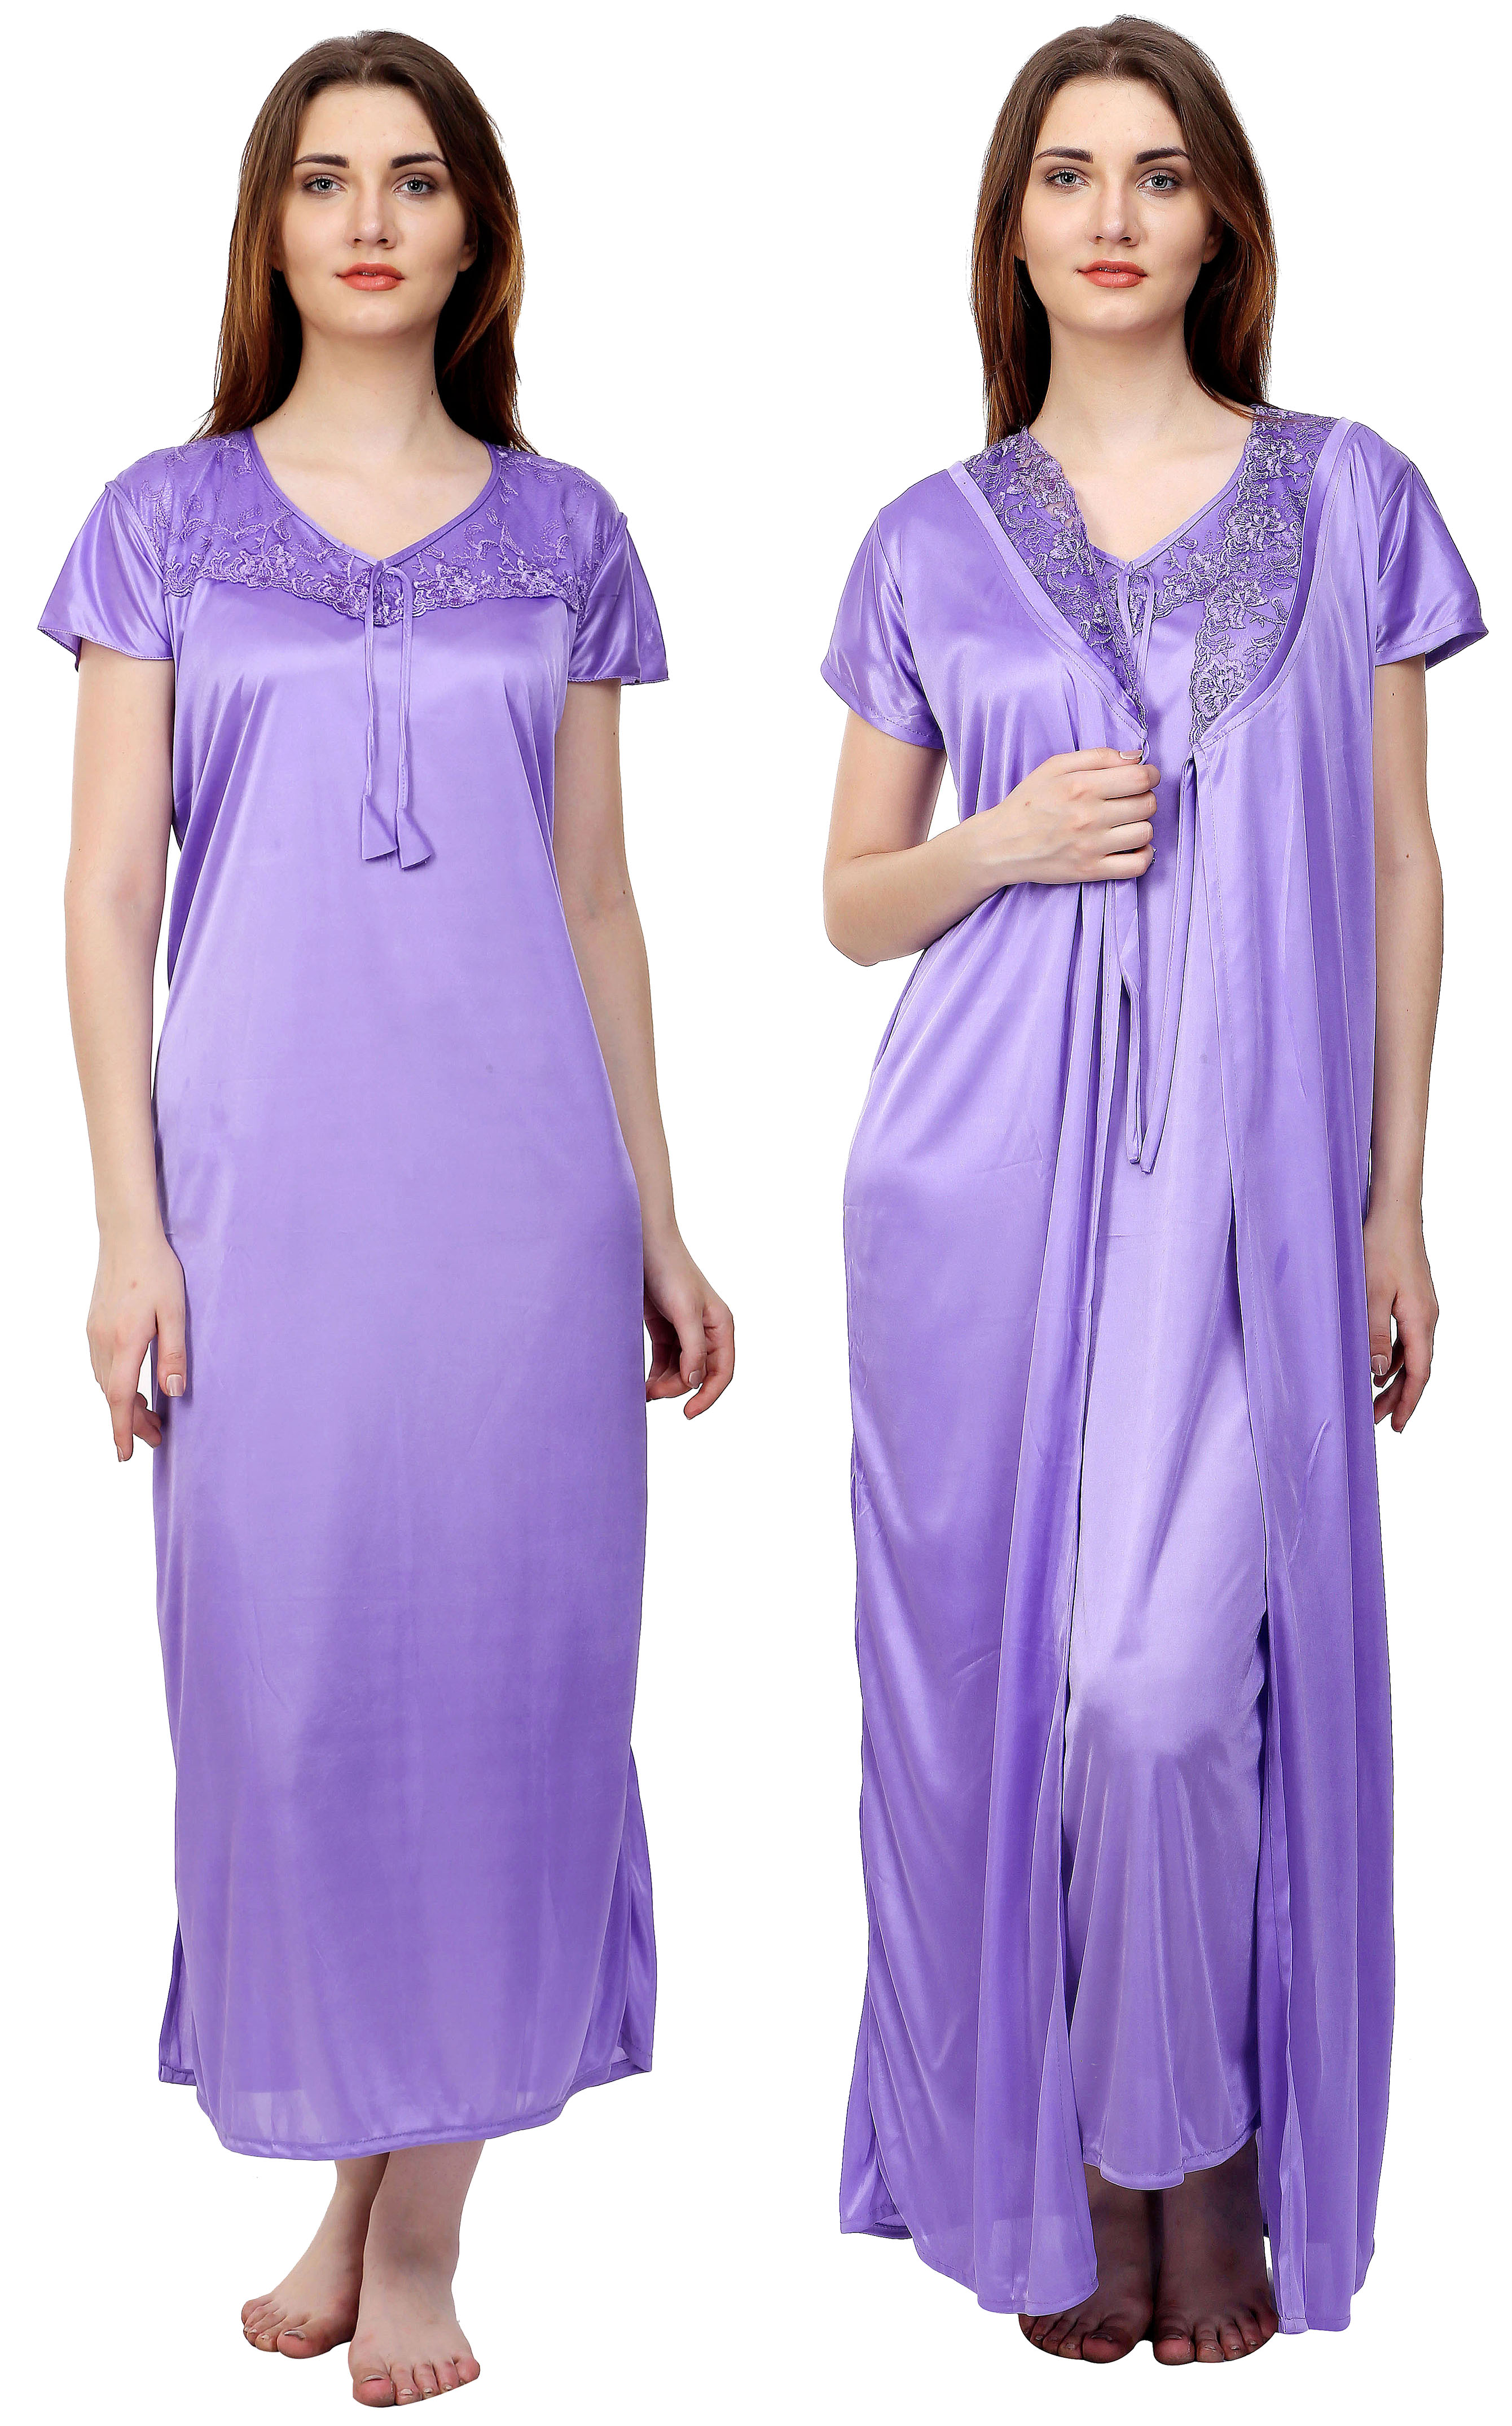 Buy Boosah Womens Moove Color Satin Solid Nighty And Robe Online ₹649 From Shopclues 